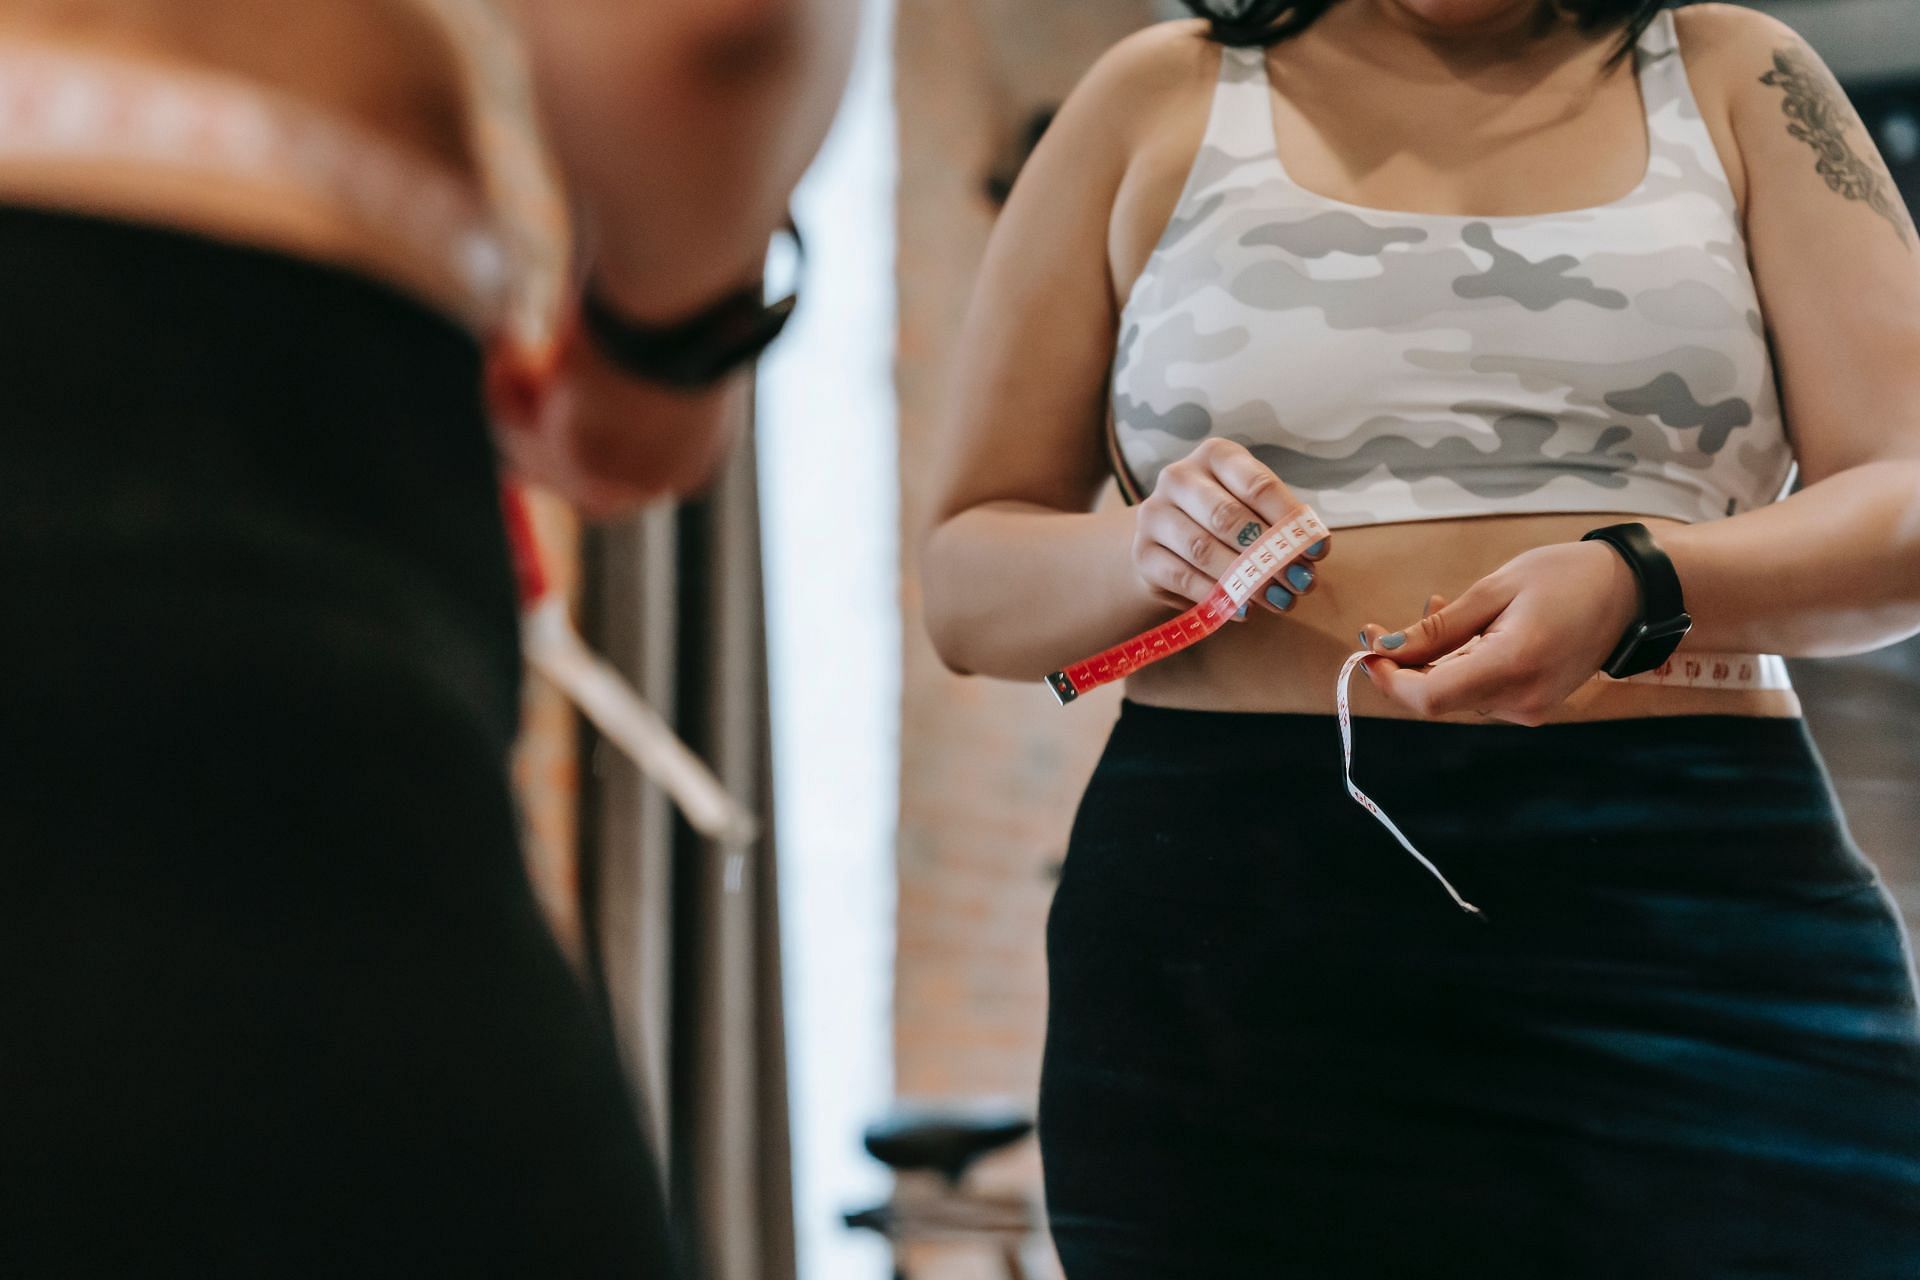 PCOS weight gain is a common condition that many women suffer. (Image via Pexels / Andres Ayrton)